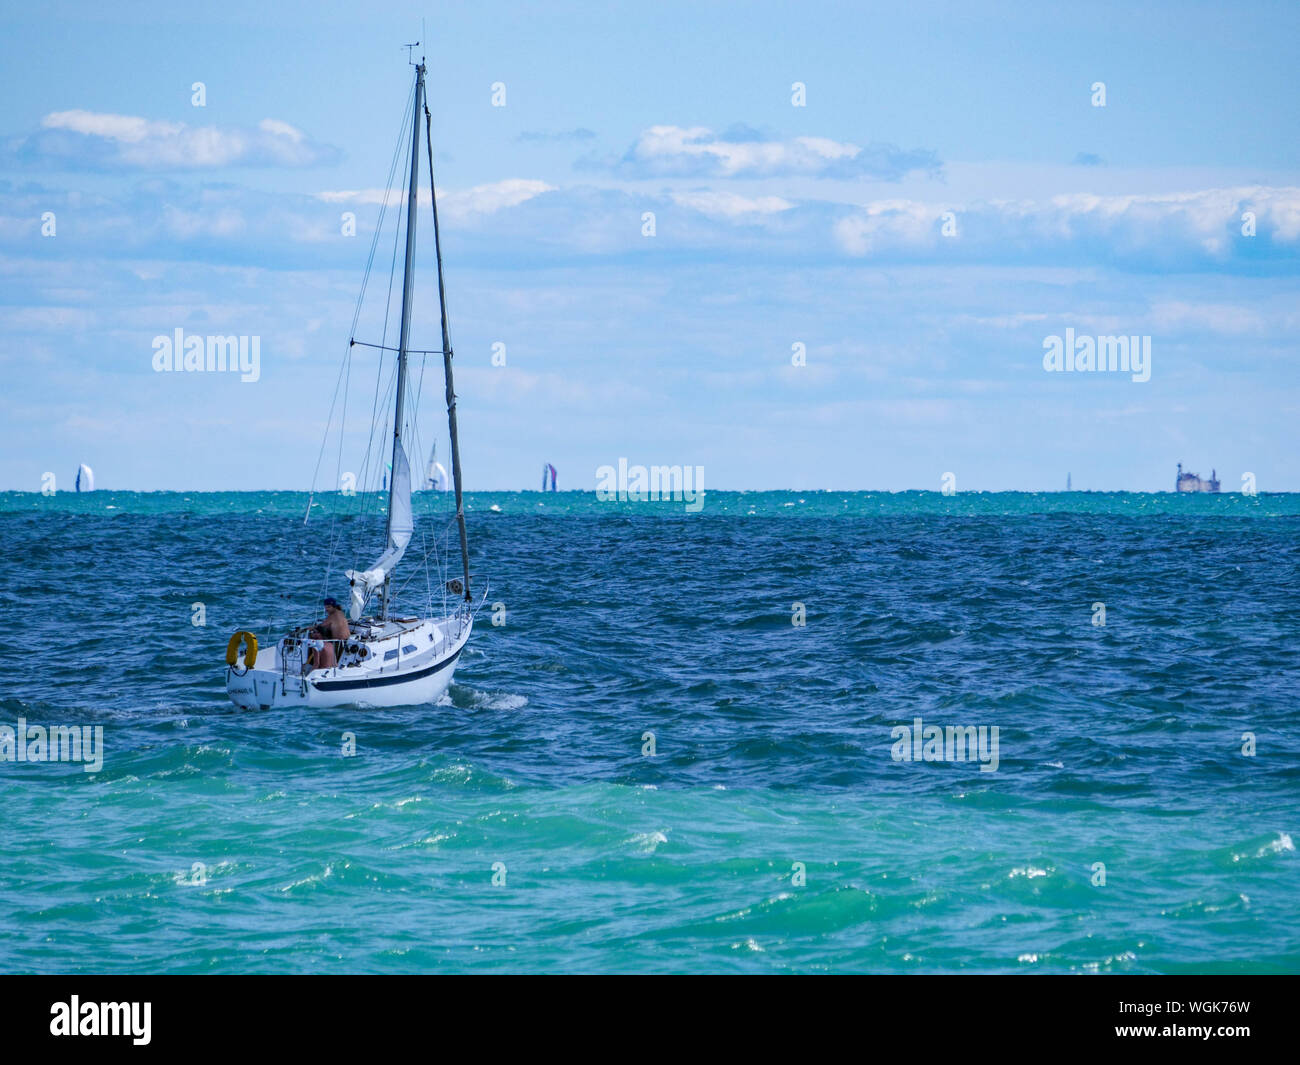 A sailboat navigating the choppy waters of Lake Michigan off Chicago. The masts of distant sailboats peek over the horizon in the distance. Stock Photo